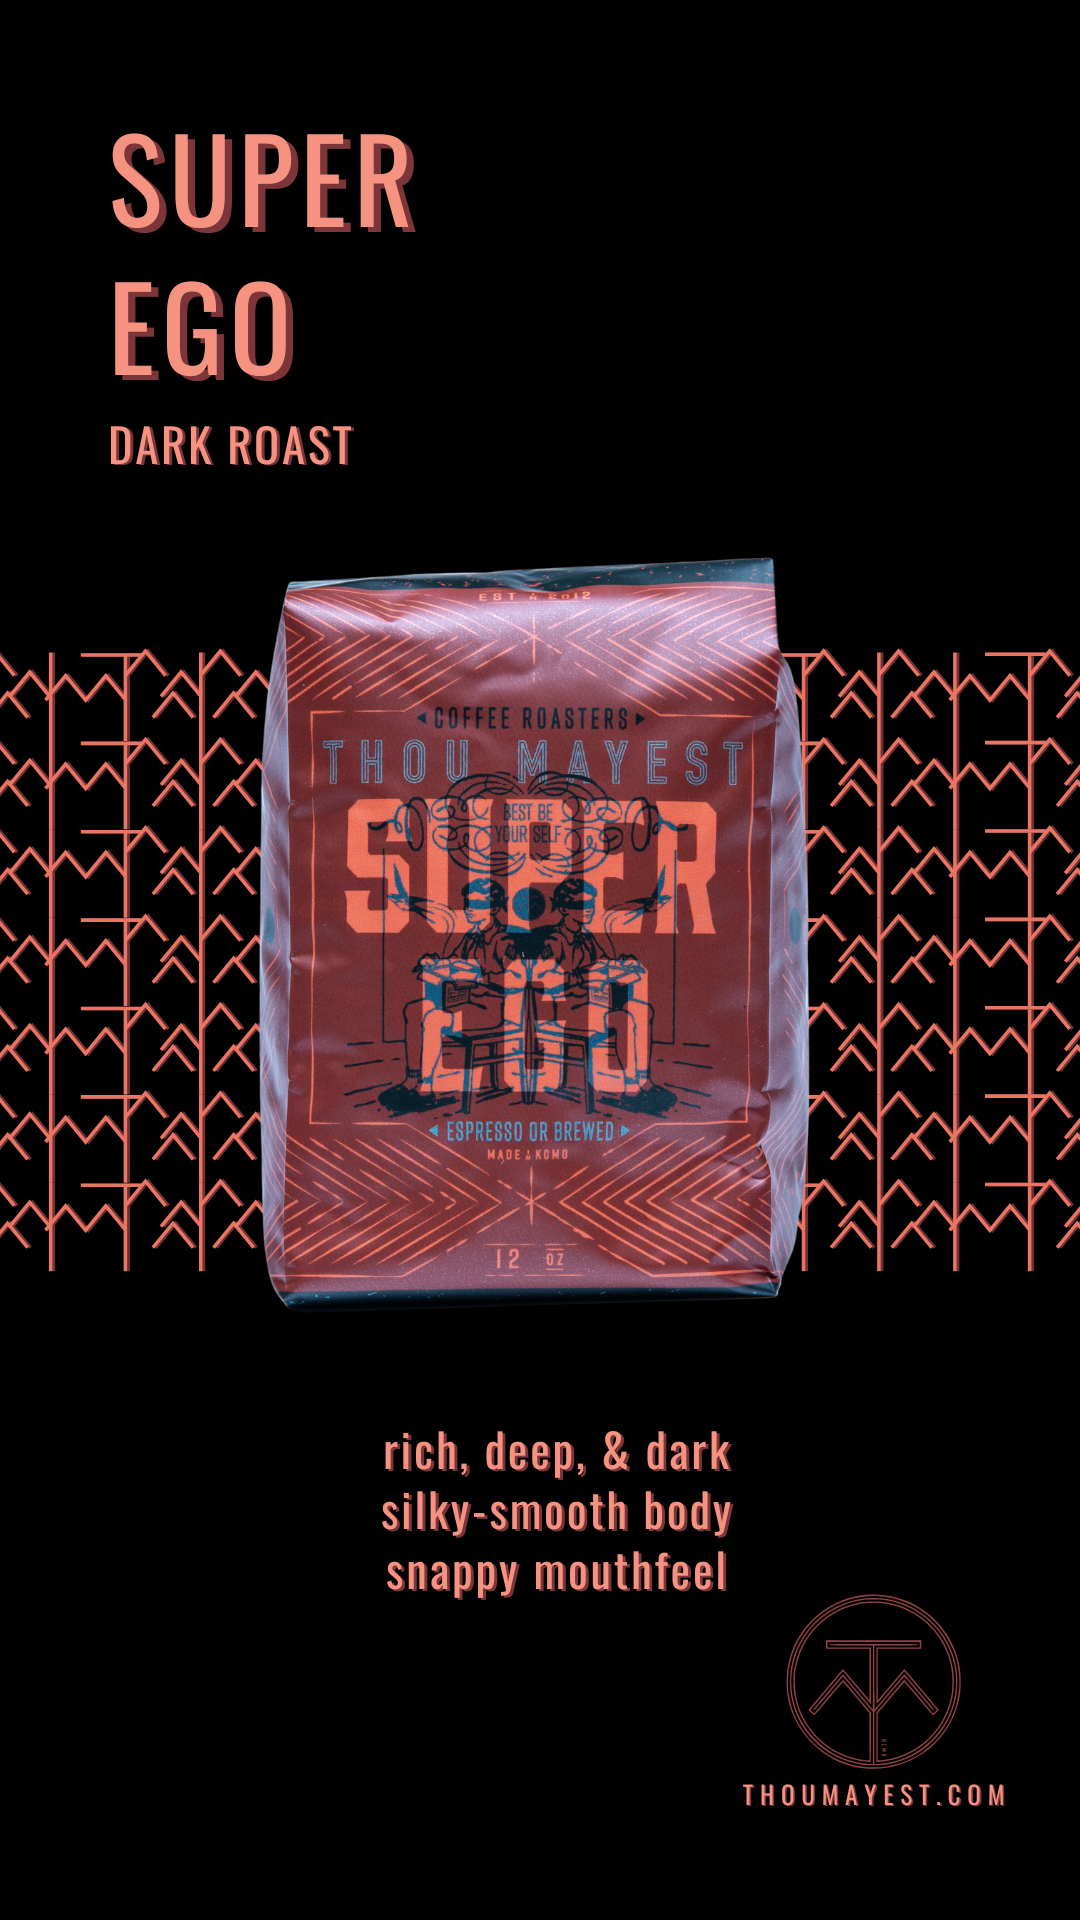 Image of our Super Ego coffee bag with description - dark roast, rich deep & dark, silky-smooth body, snappy mouthfeel. Click the image to view the product page.